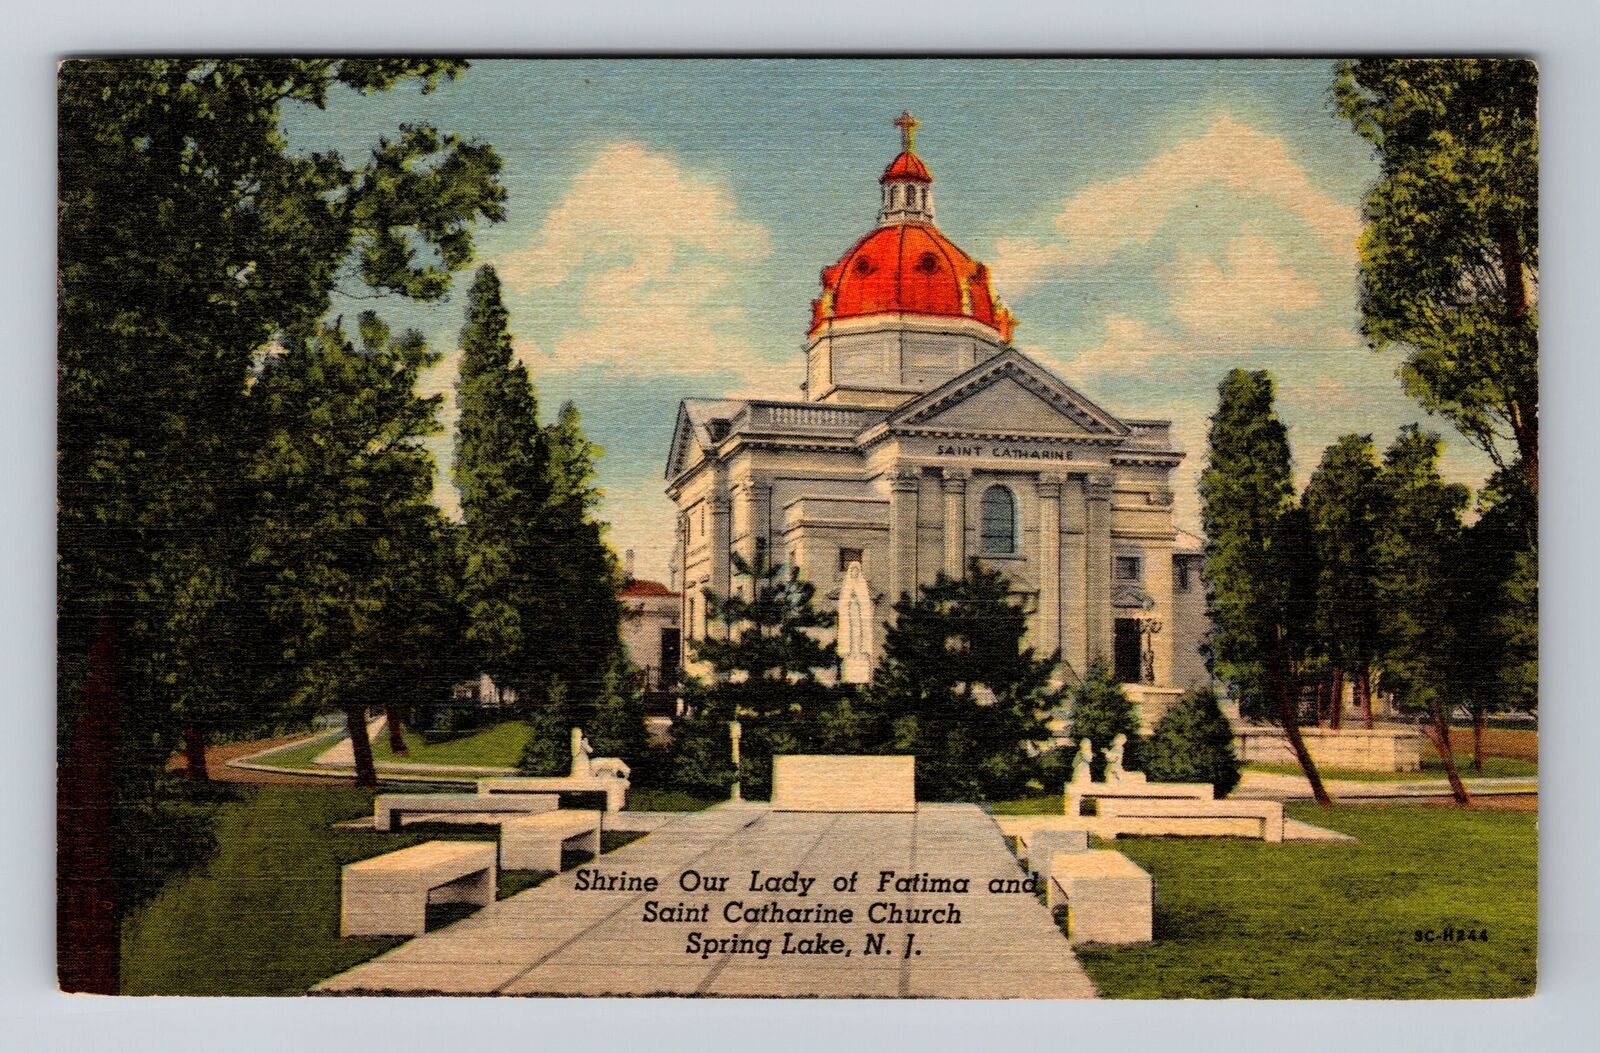 Spring Lake NJ-New Jersey, Shrine Our Lady Fatima And Church, Vintage Postcard